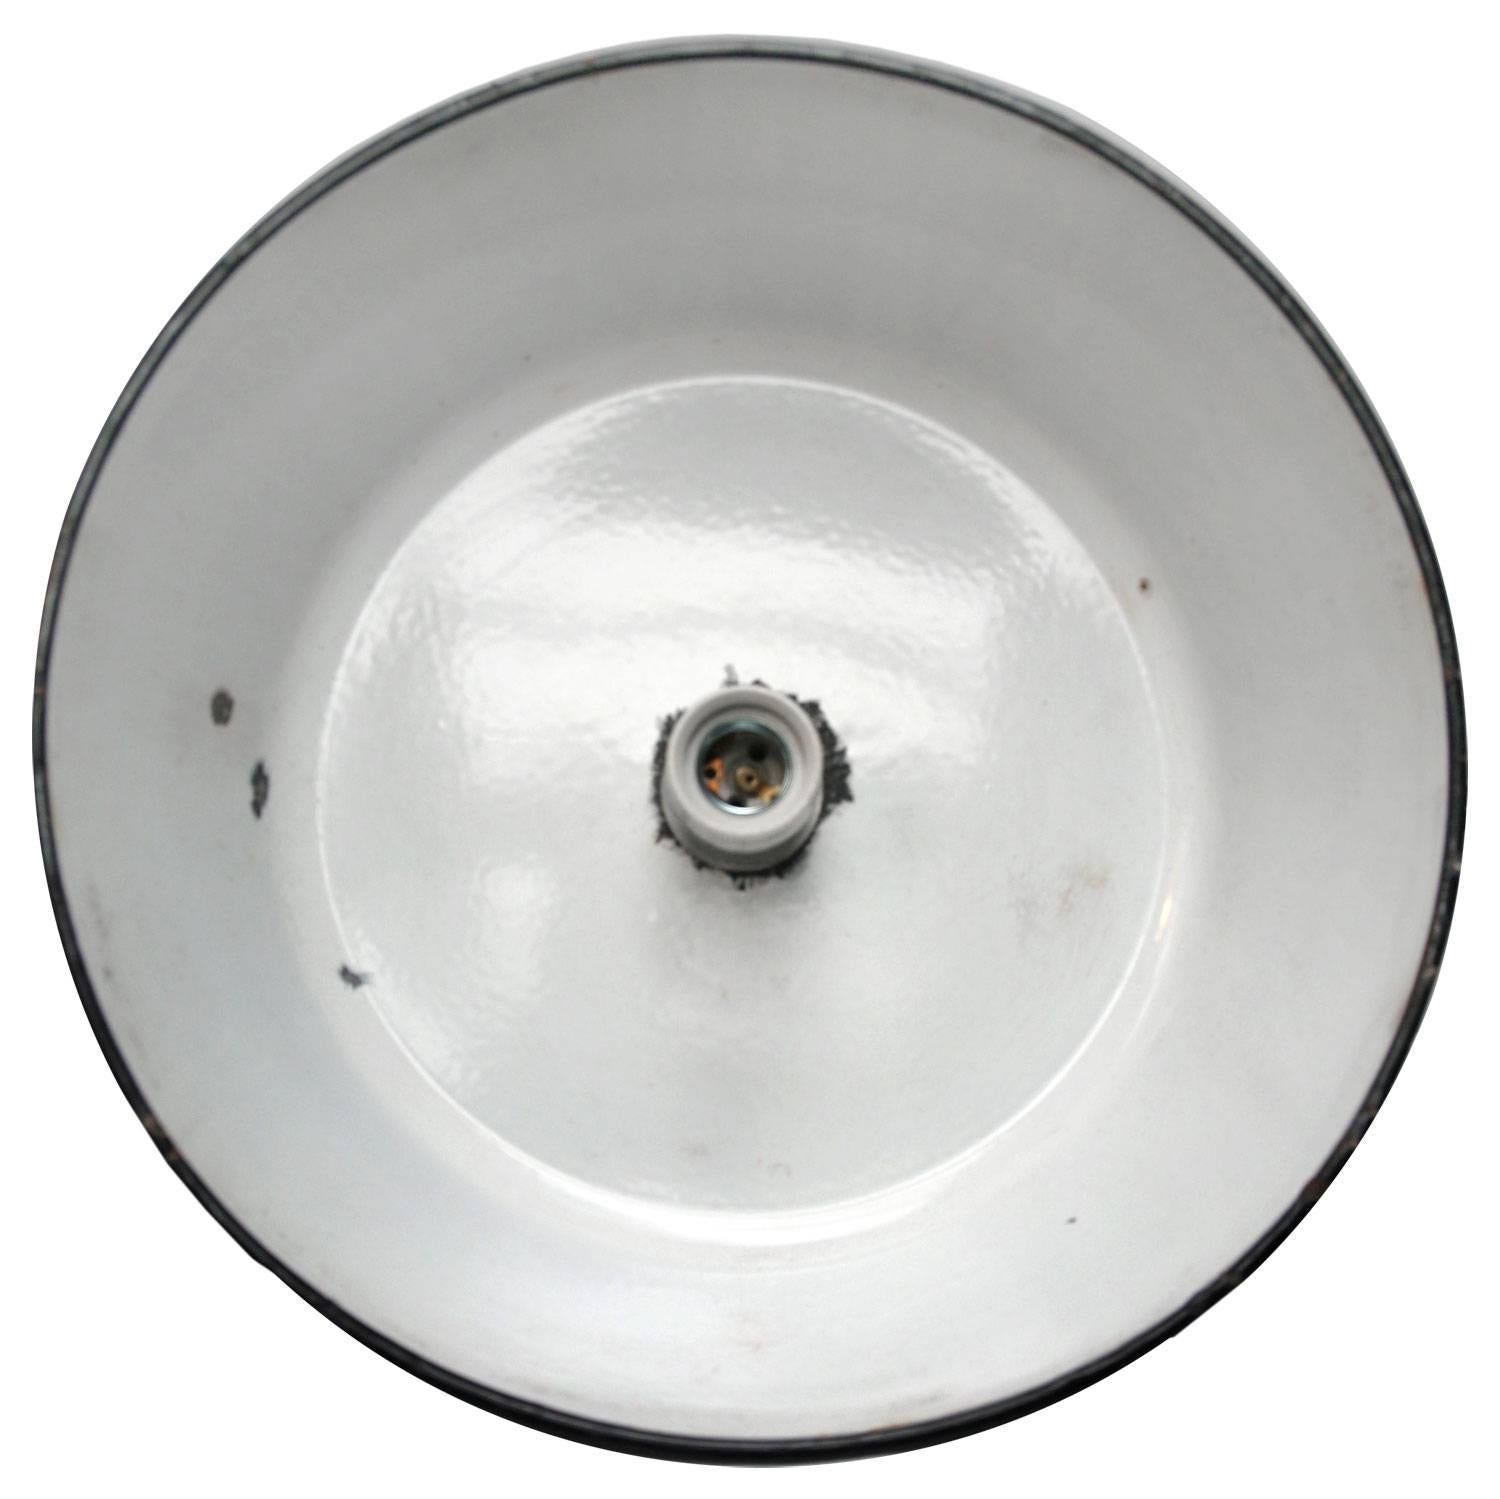 French Industrial pendant. Black enamel with white inside.

Measures: Weight 1.2 kg / 2.6 lb

Priced per individual item. All lamps have been made suitable by international standards for incandescent light bulbs, energy-efficient and LED bulbs.